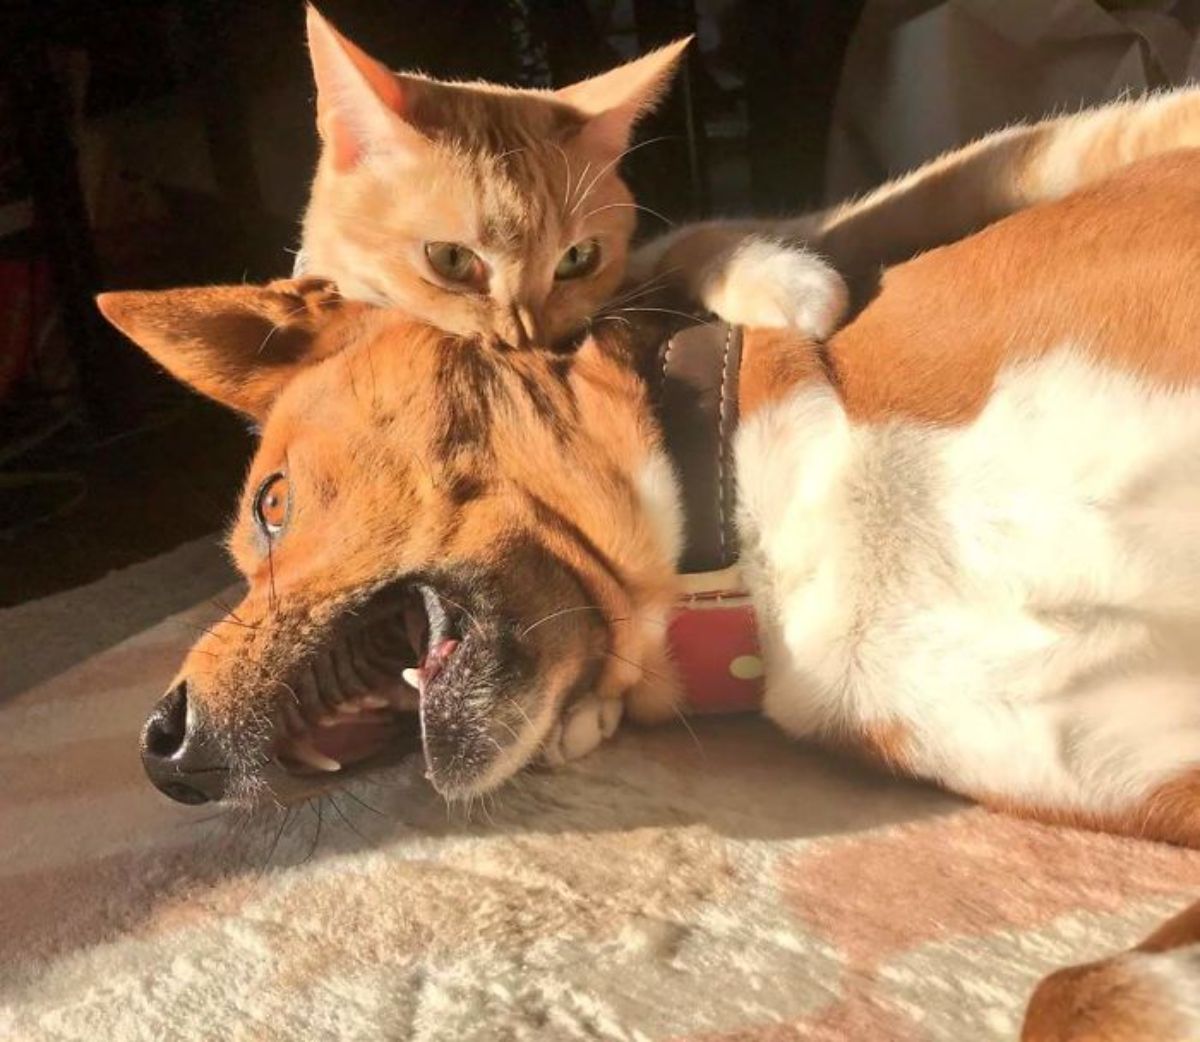 orange cat biting the throat of a brown and white dog that's screaming in pain